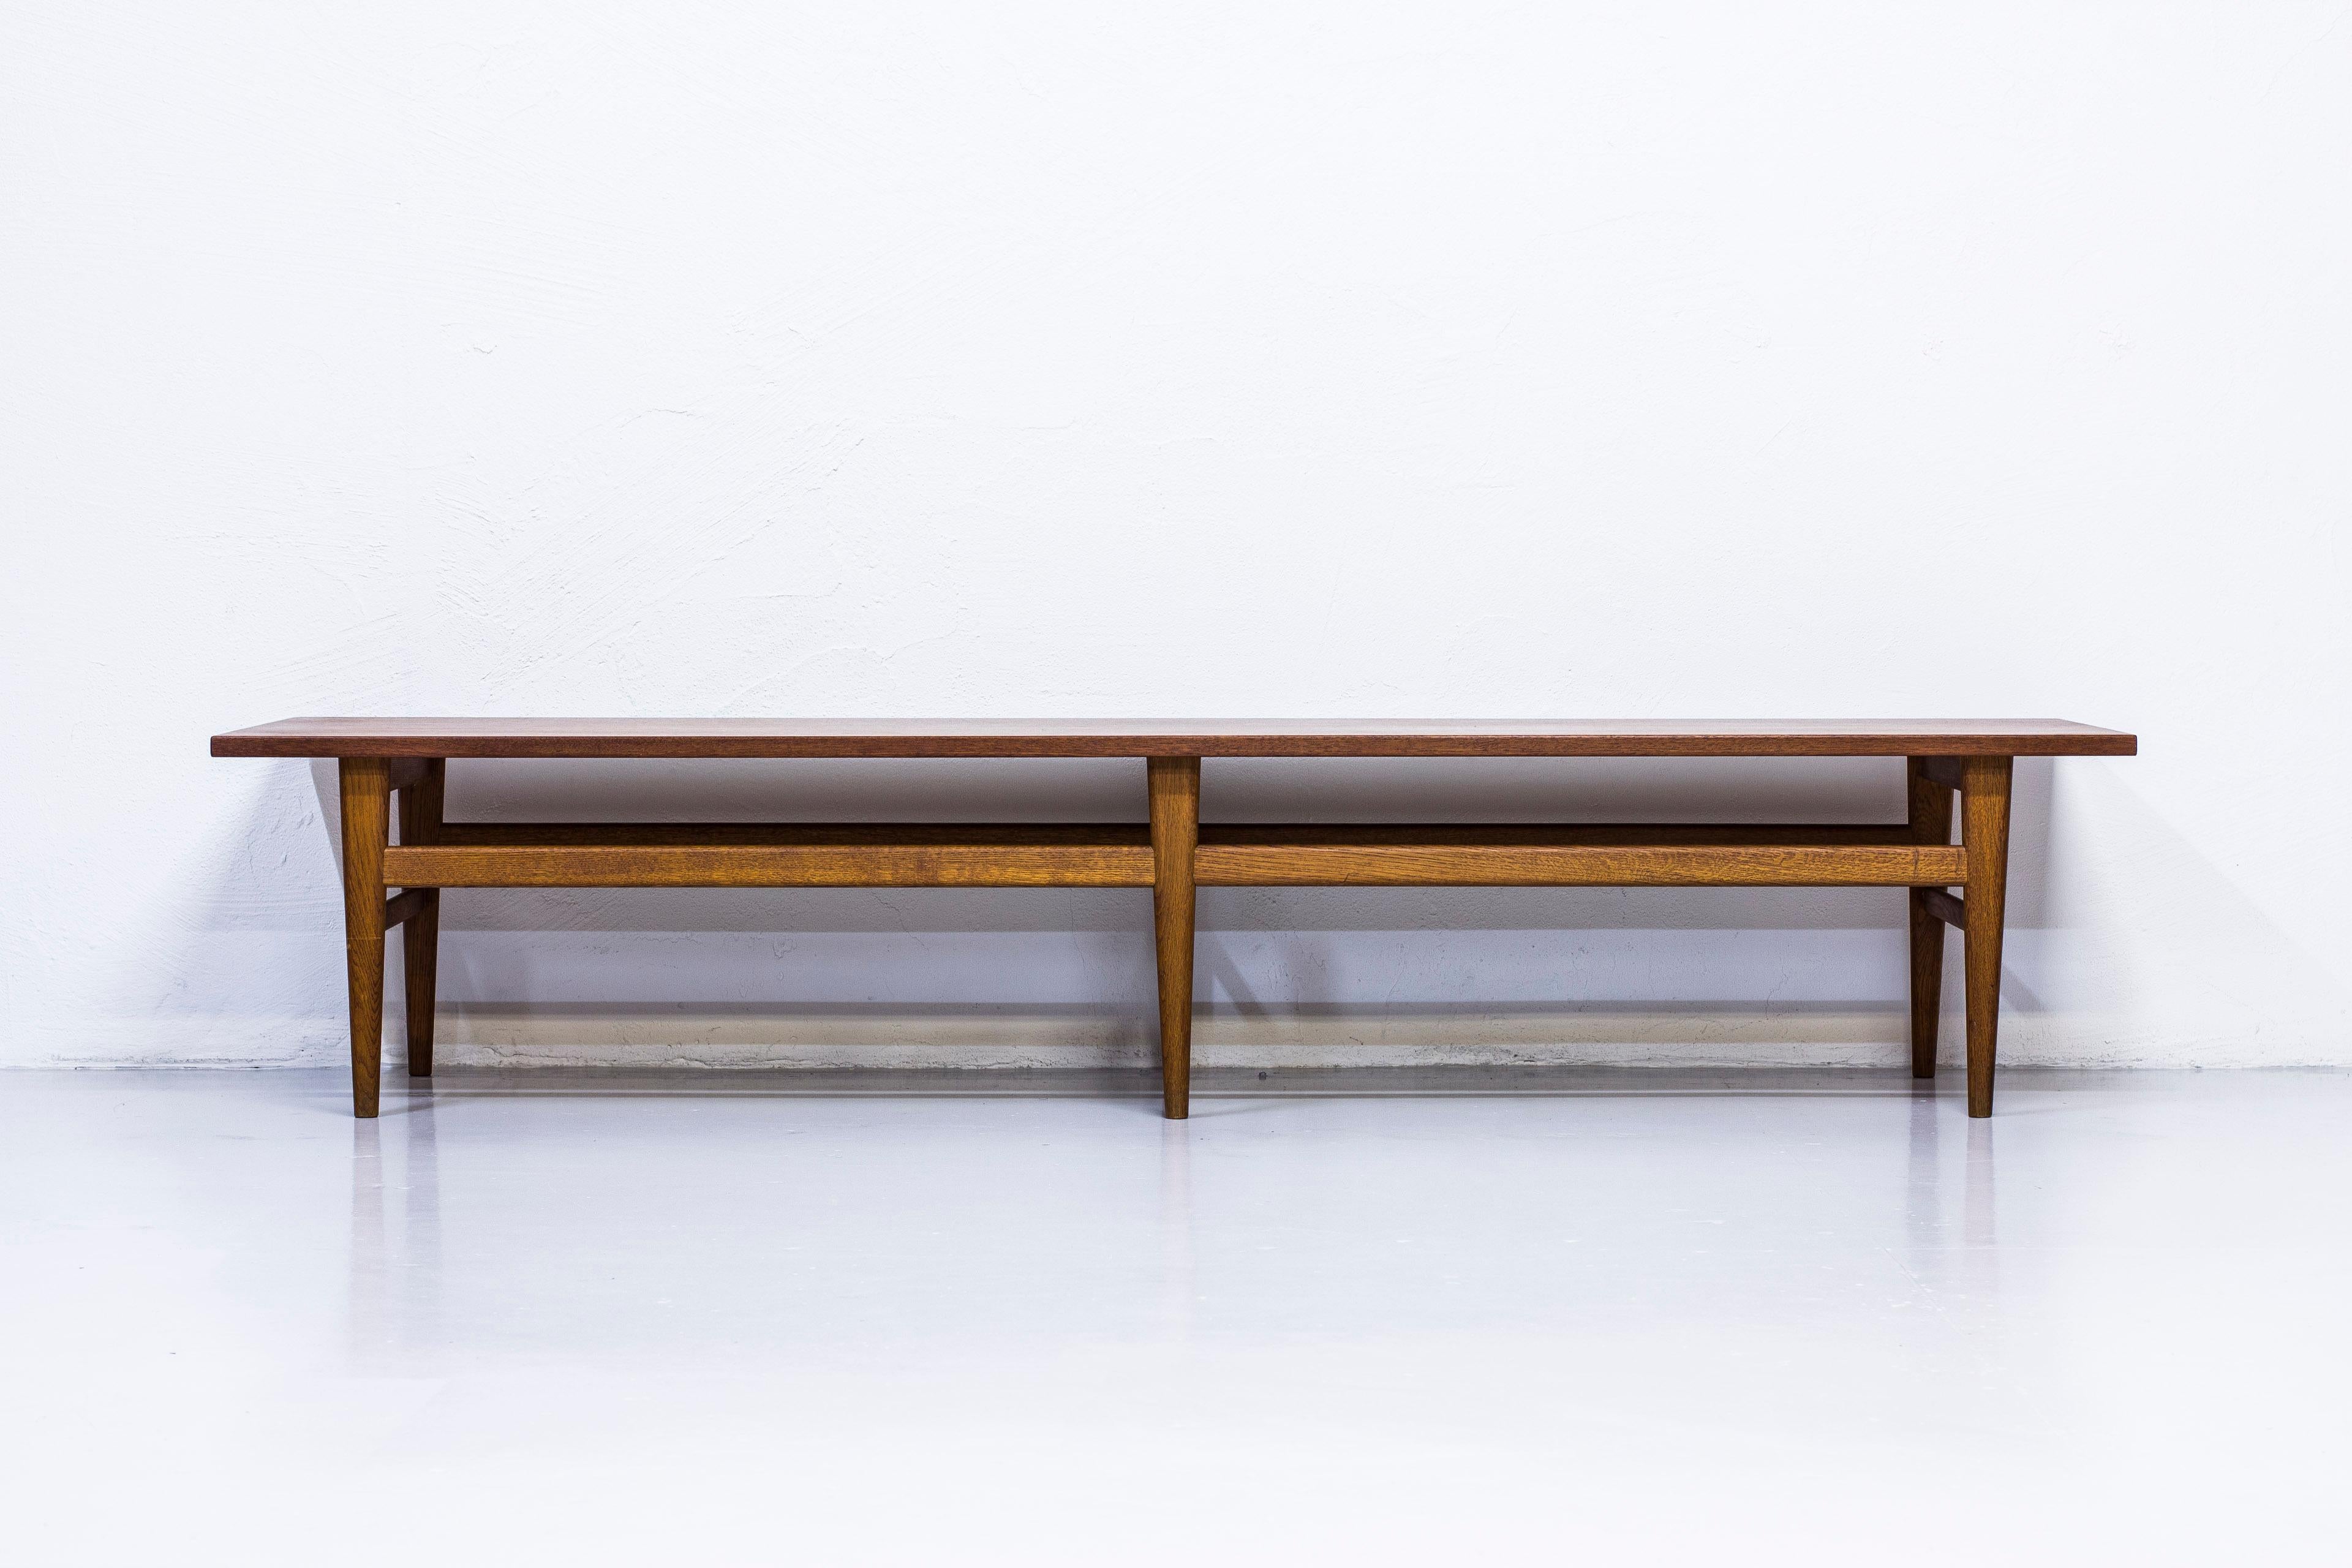 Bench/table designed by Eric Johansson. produced in Sweden by Abrahamssons Möbler during the 1950s. Made from oak and teak wood. Excellent vintage condition with very few signs of use and wear.
 